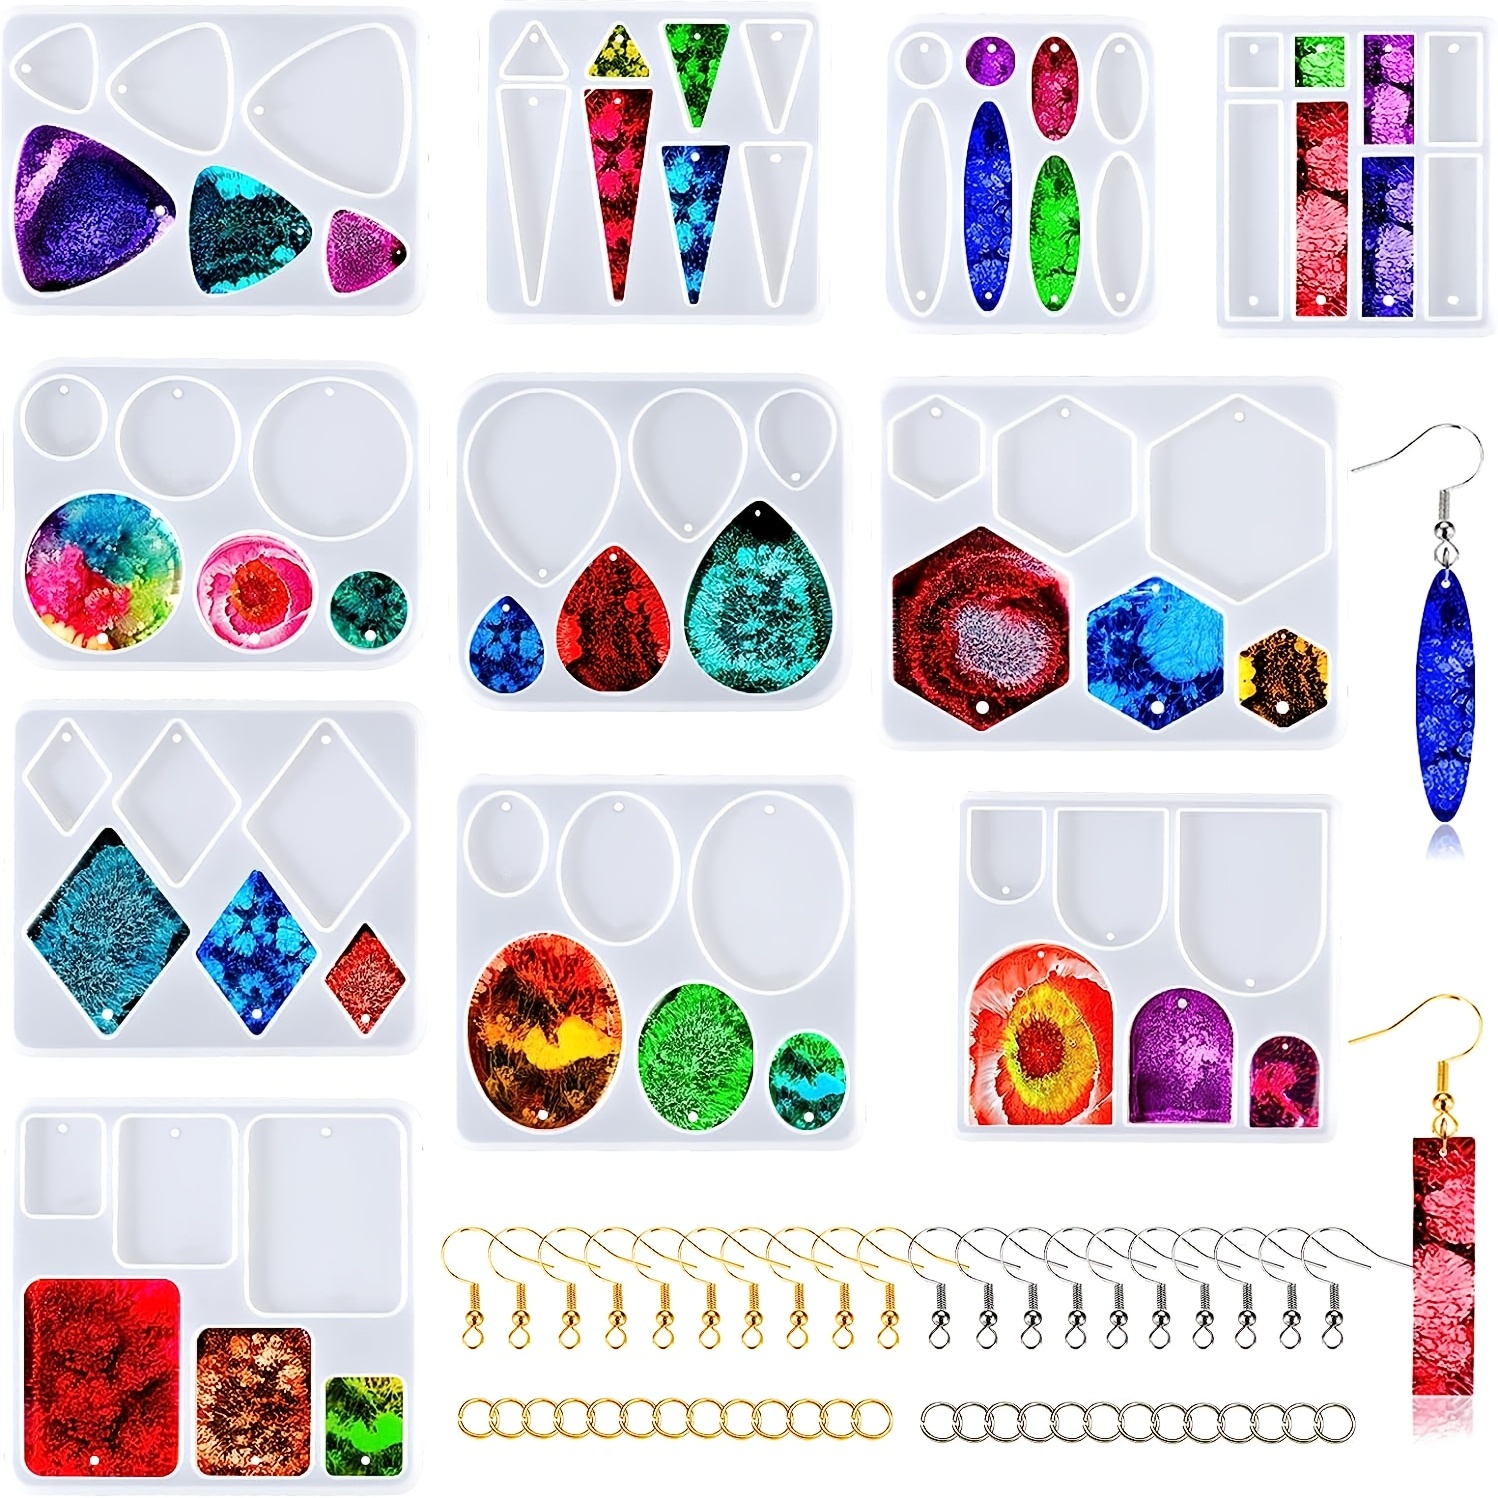  Resin Jewelry Molds Silicone, 2 PCS Earring Resin Molds with  Hole, Resin Casting Molds for DIY Crafting Earrings Necklace Pendant  Keychains Jewelry Making : Arts, Crafts & Sewing